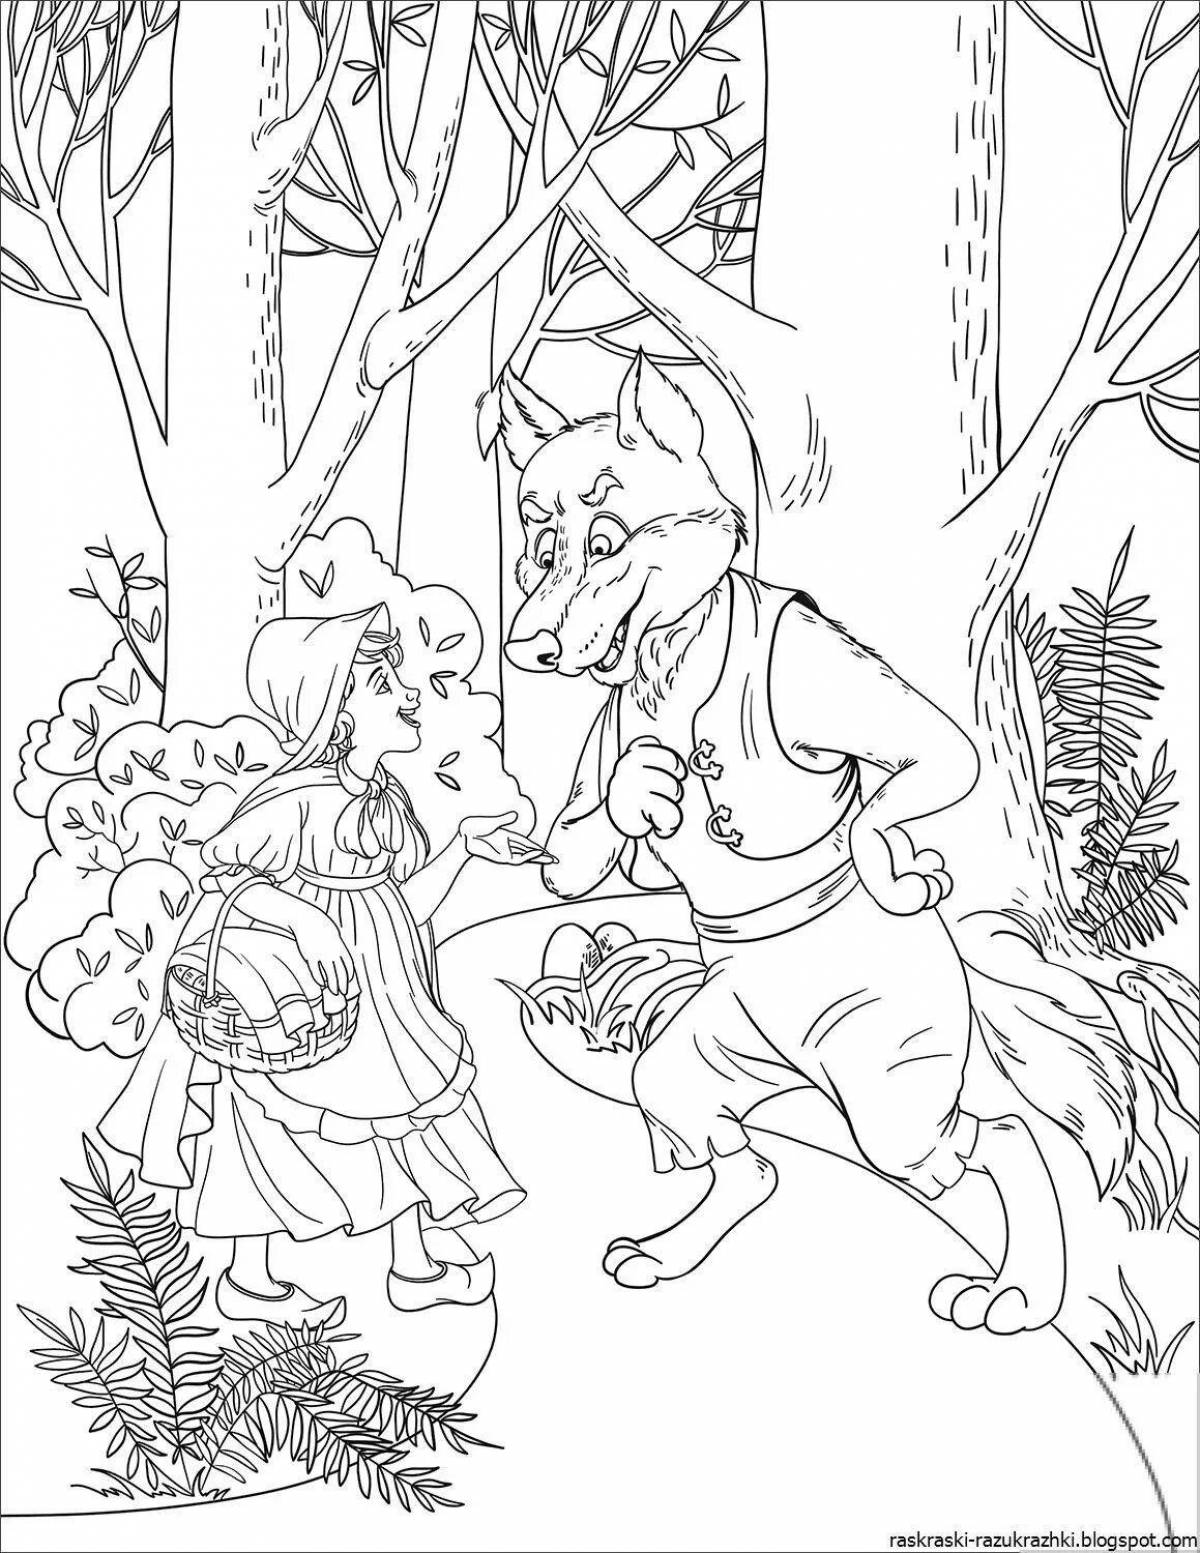 Living gray wolf and little red riding hood coloring book